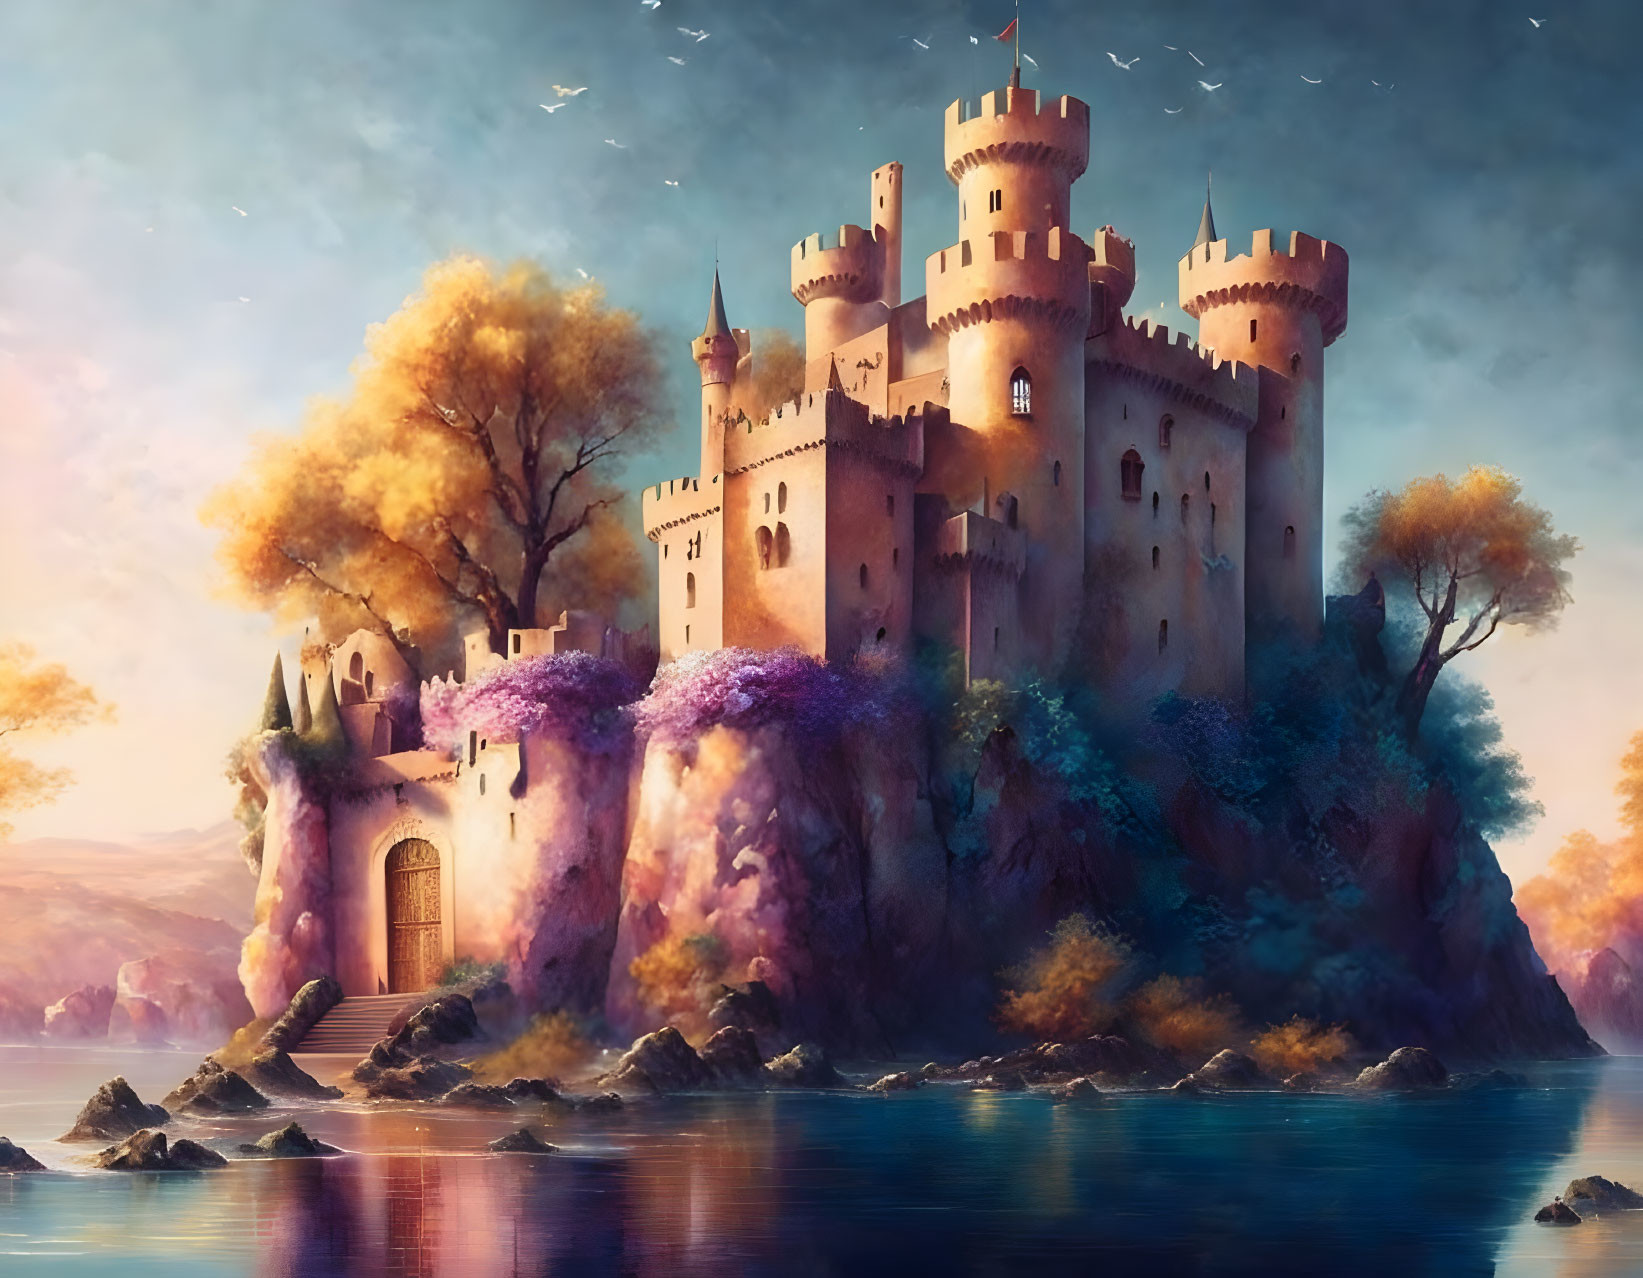 Castle on Island Surrounded by Water and Purple Flowers